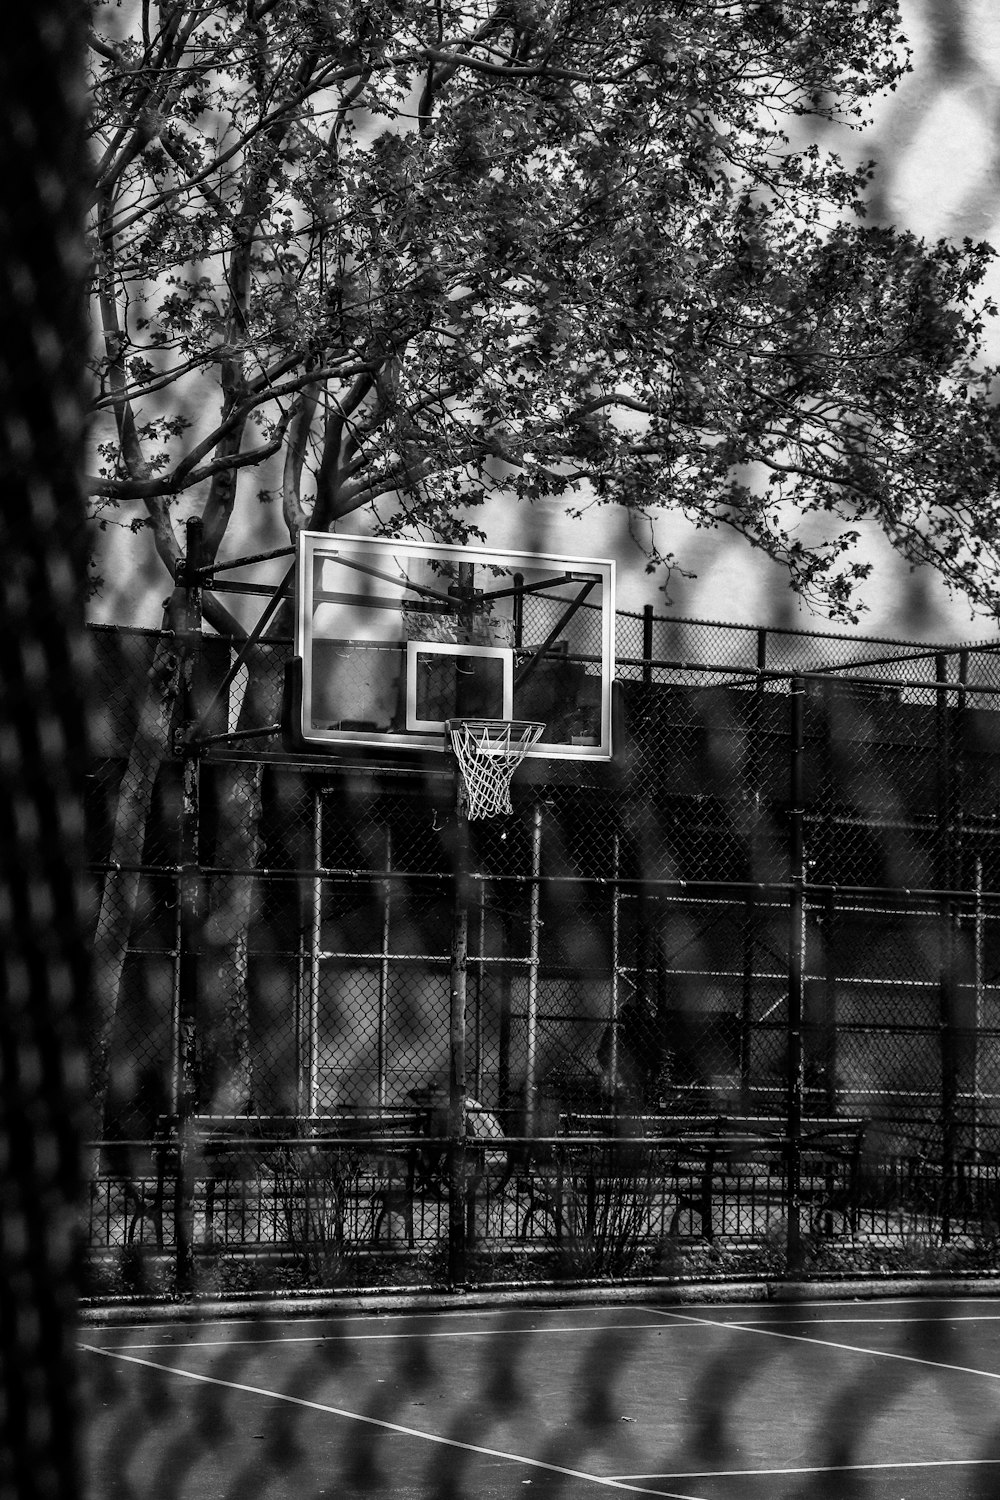 a black and white photo of a basketball court